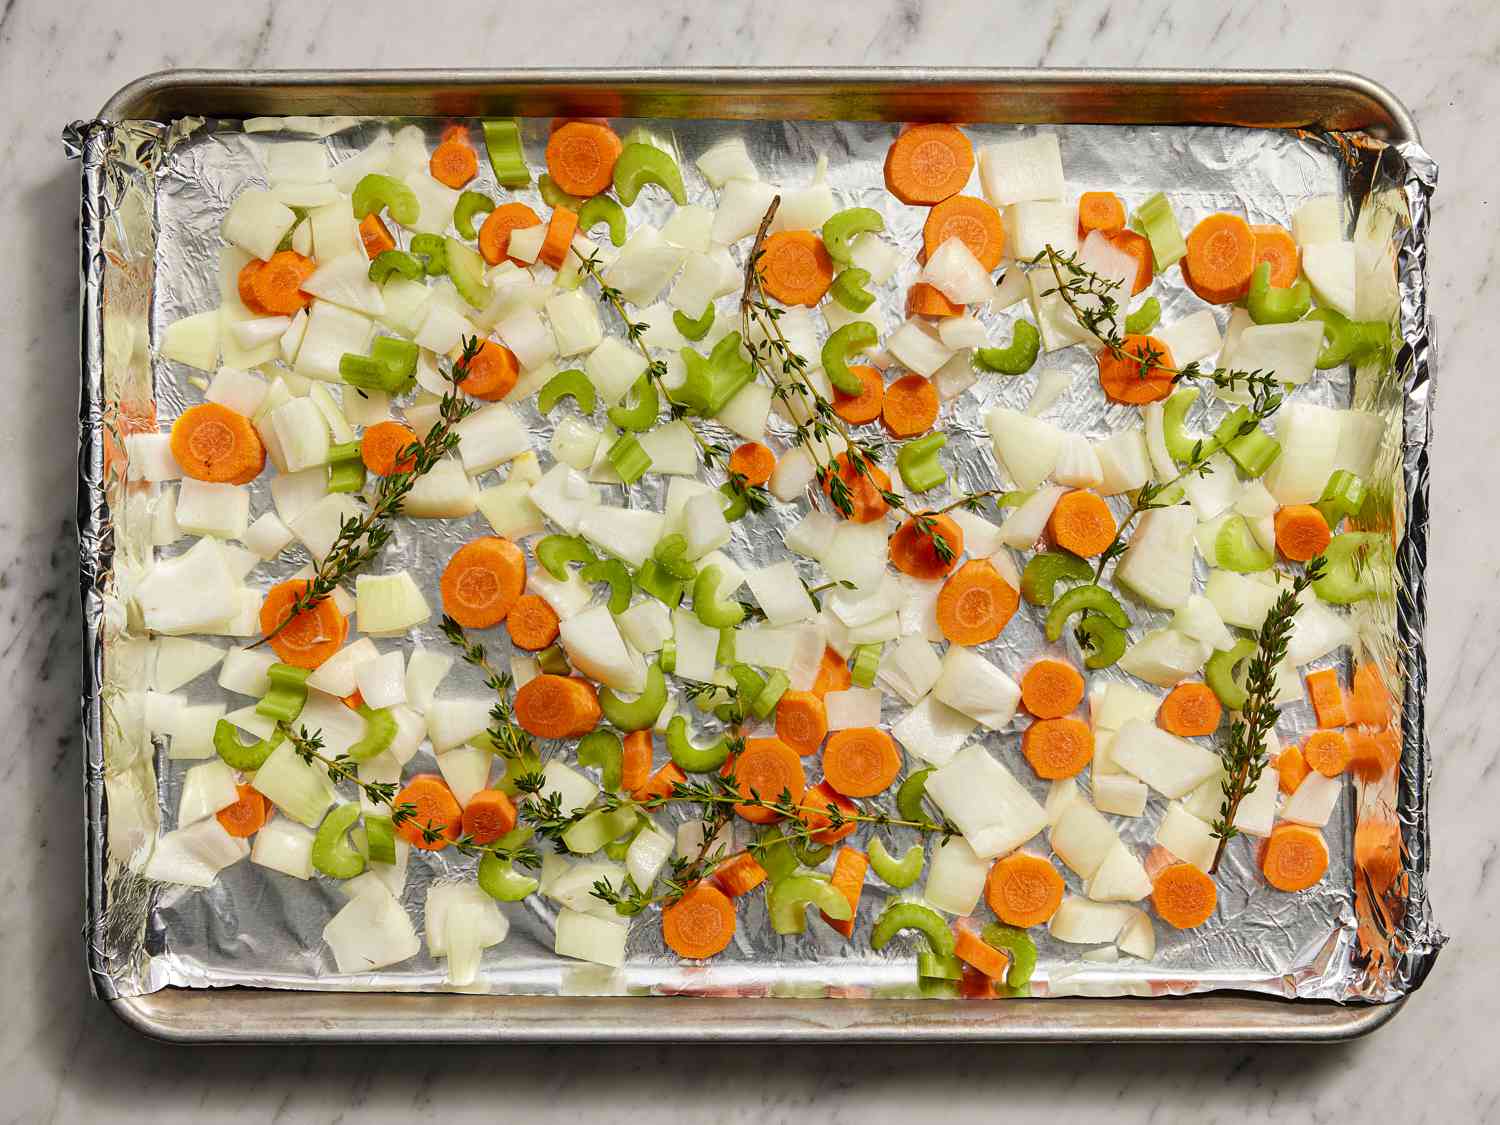 Vegetables and herbs scattered on a baking tray